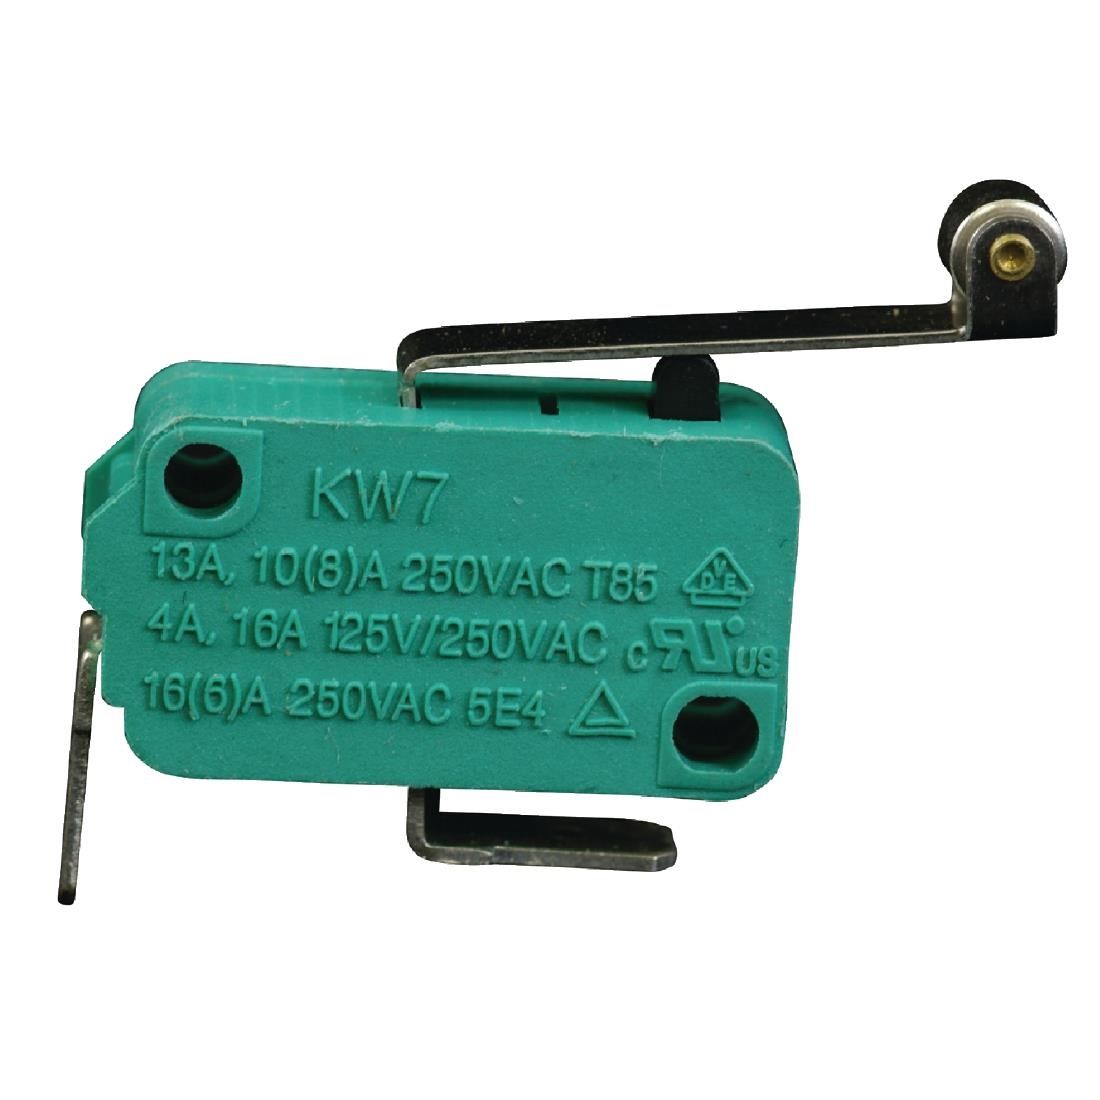 AA118 Positional Switch